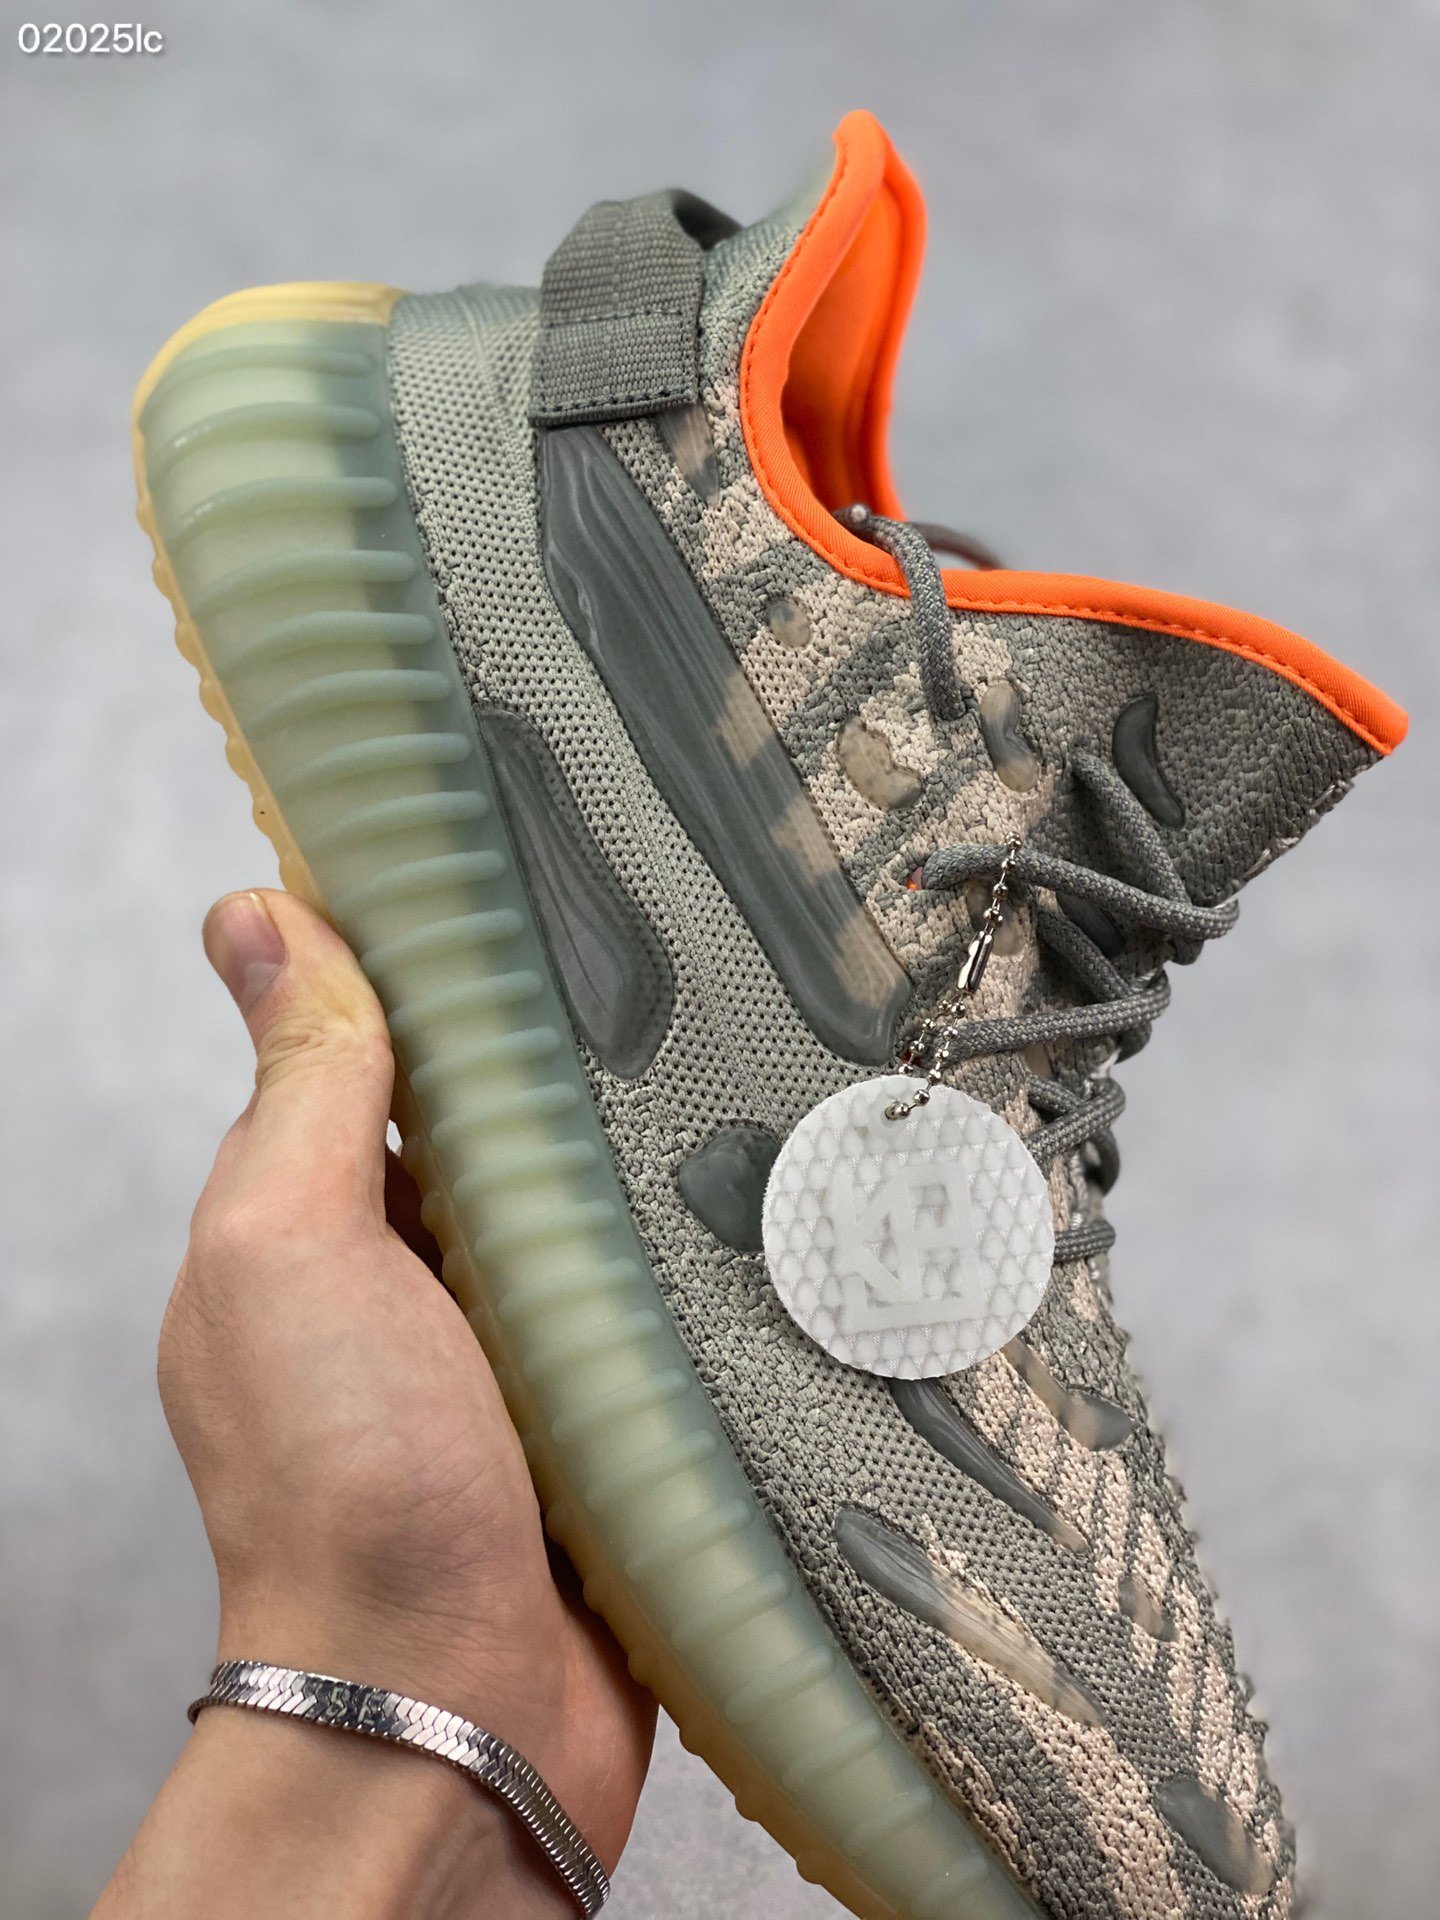 2020 cheap Adidas yeezy Boost 350 V2 Sneakers Unisex # 225176, cheap Adidas Yeezy Shoes, only $99!